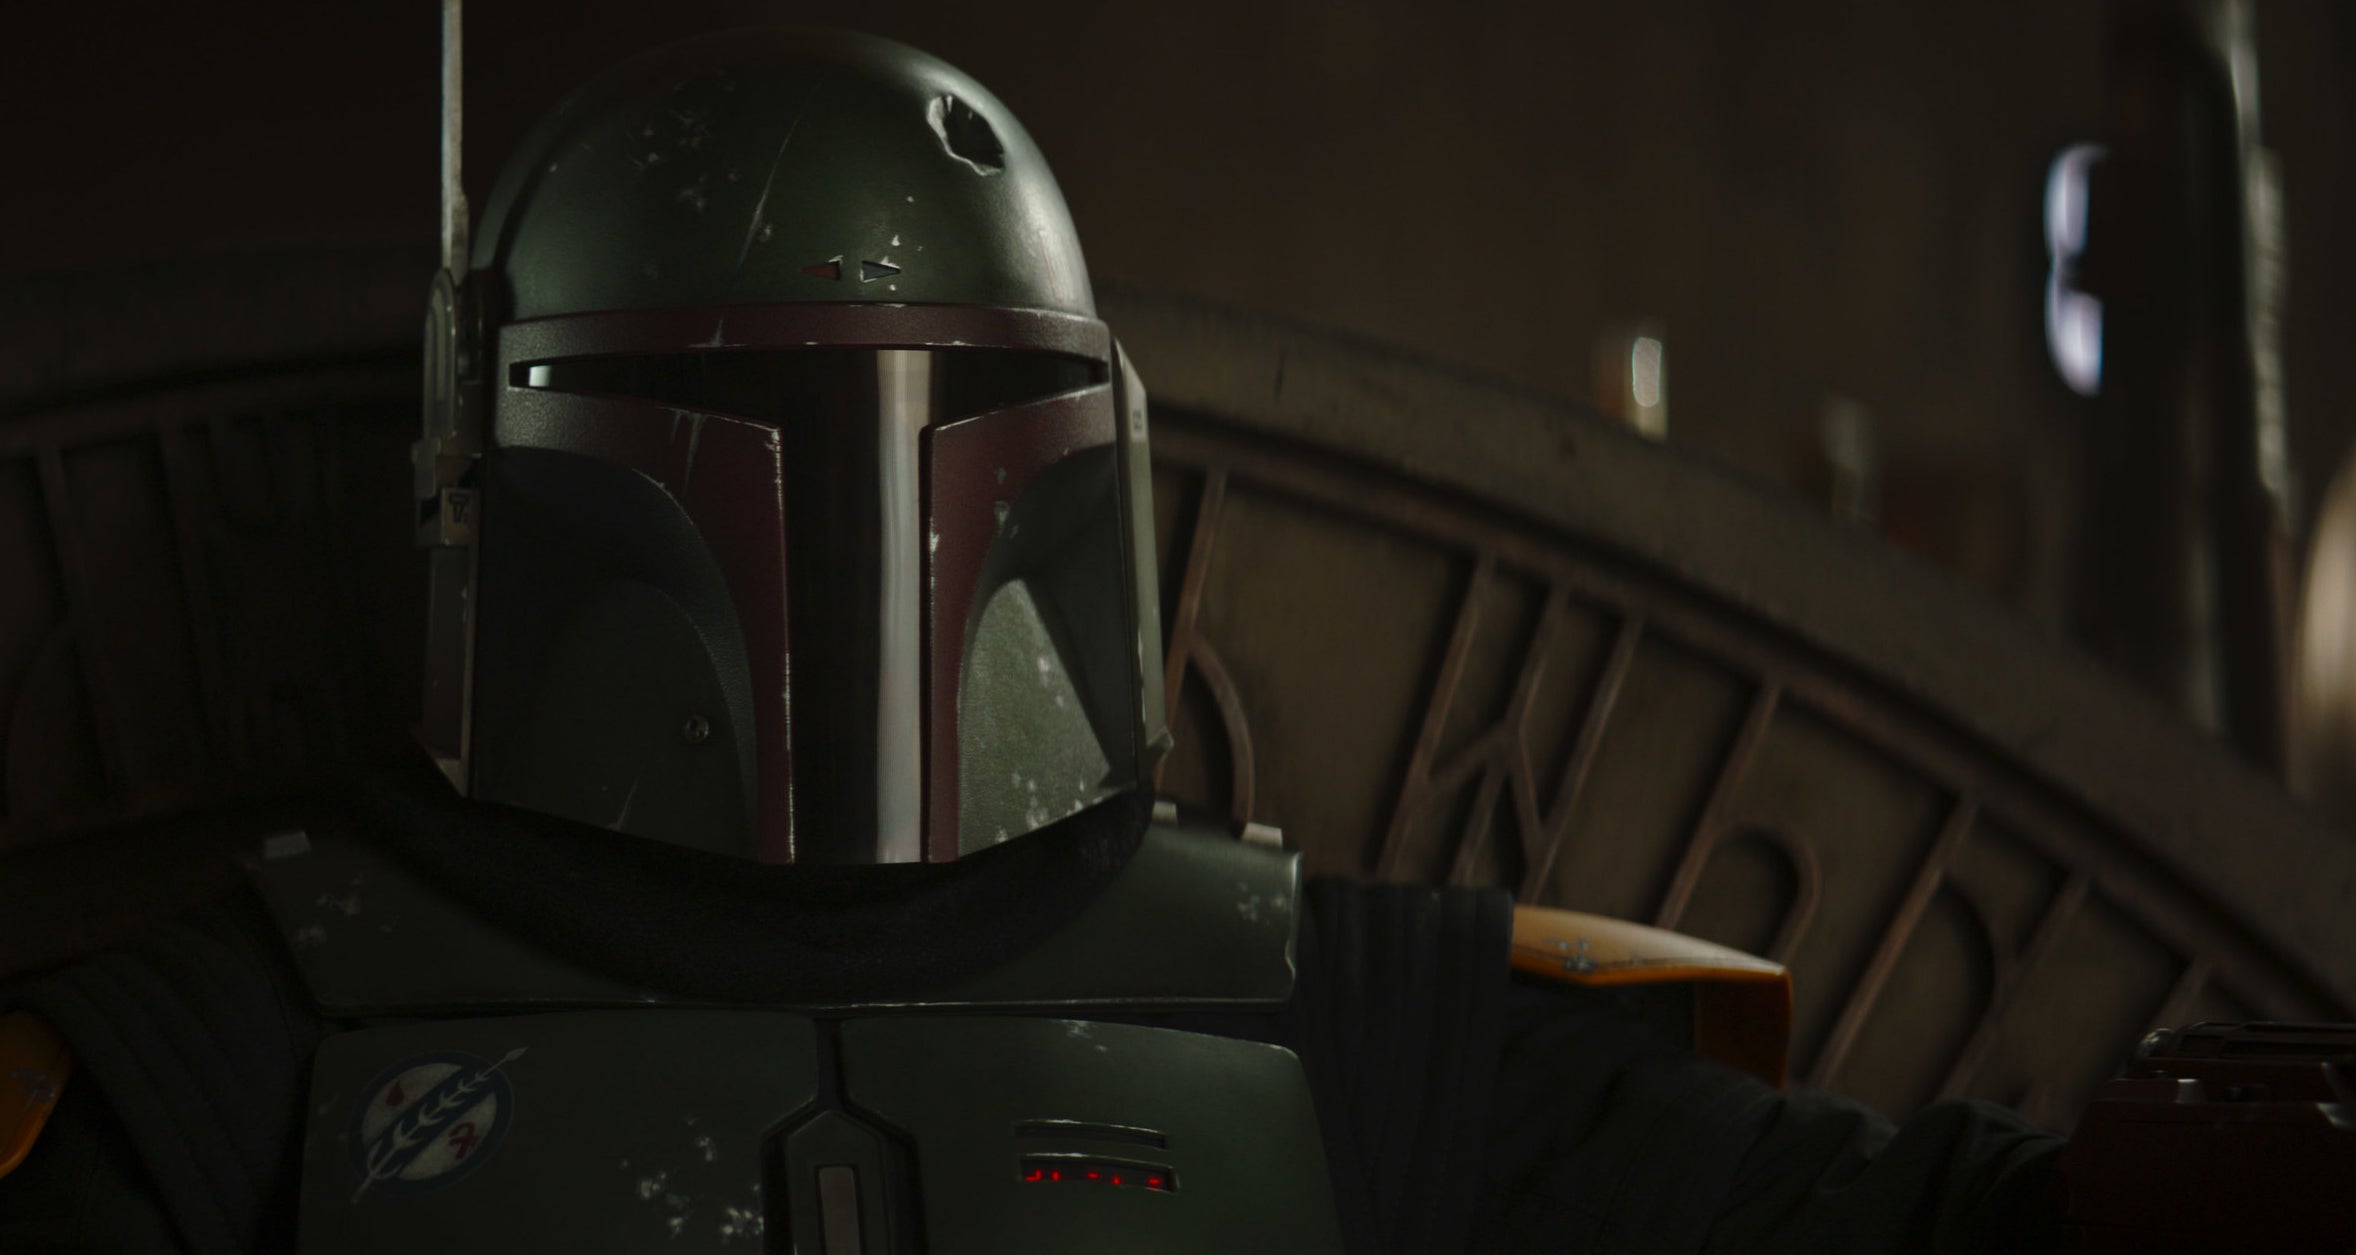 Boba Fett sits with his mask on